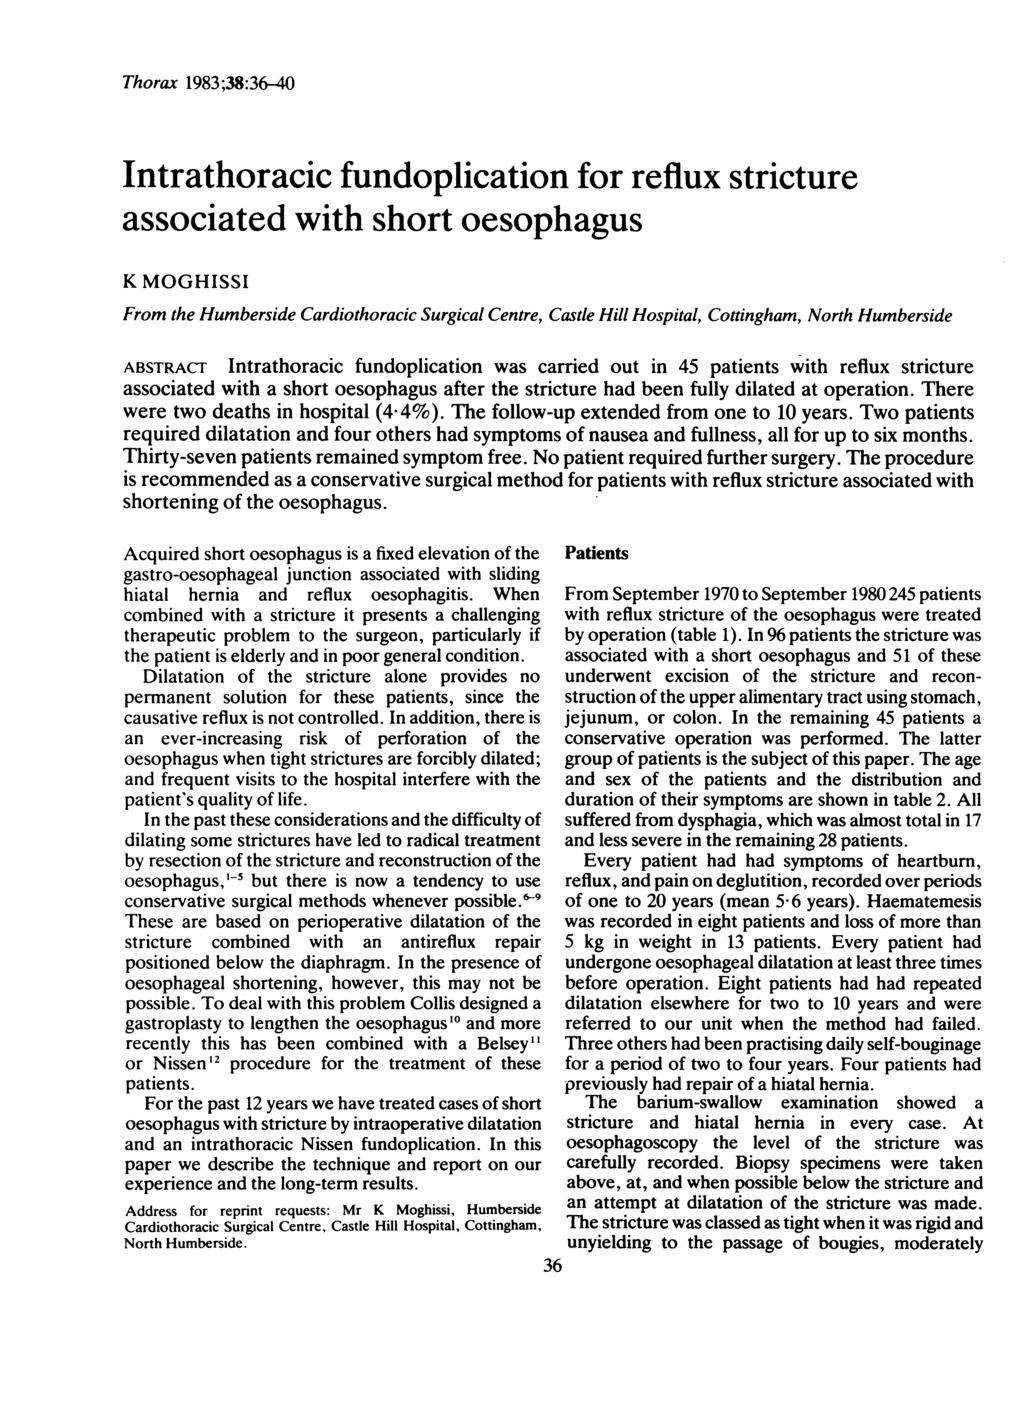 Thorax 1983;38:36-40 Intrathoracic fundoplication for reflux stricture associated with short oesophagus K MOGHISSI From the Humberside Cardiothoracic Surgical Centre, Castle Hill Hospital,